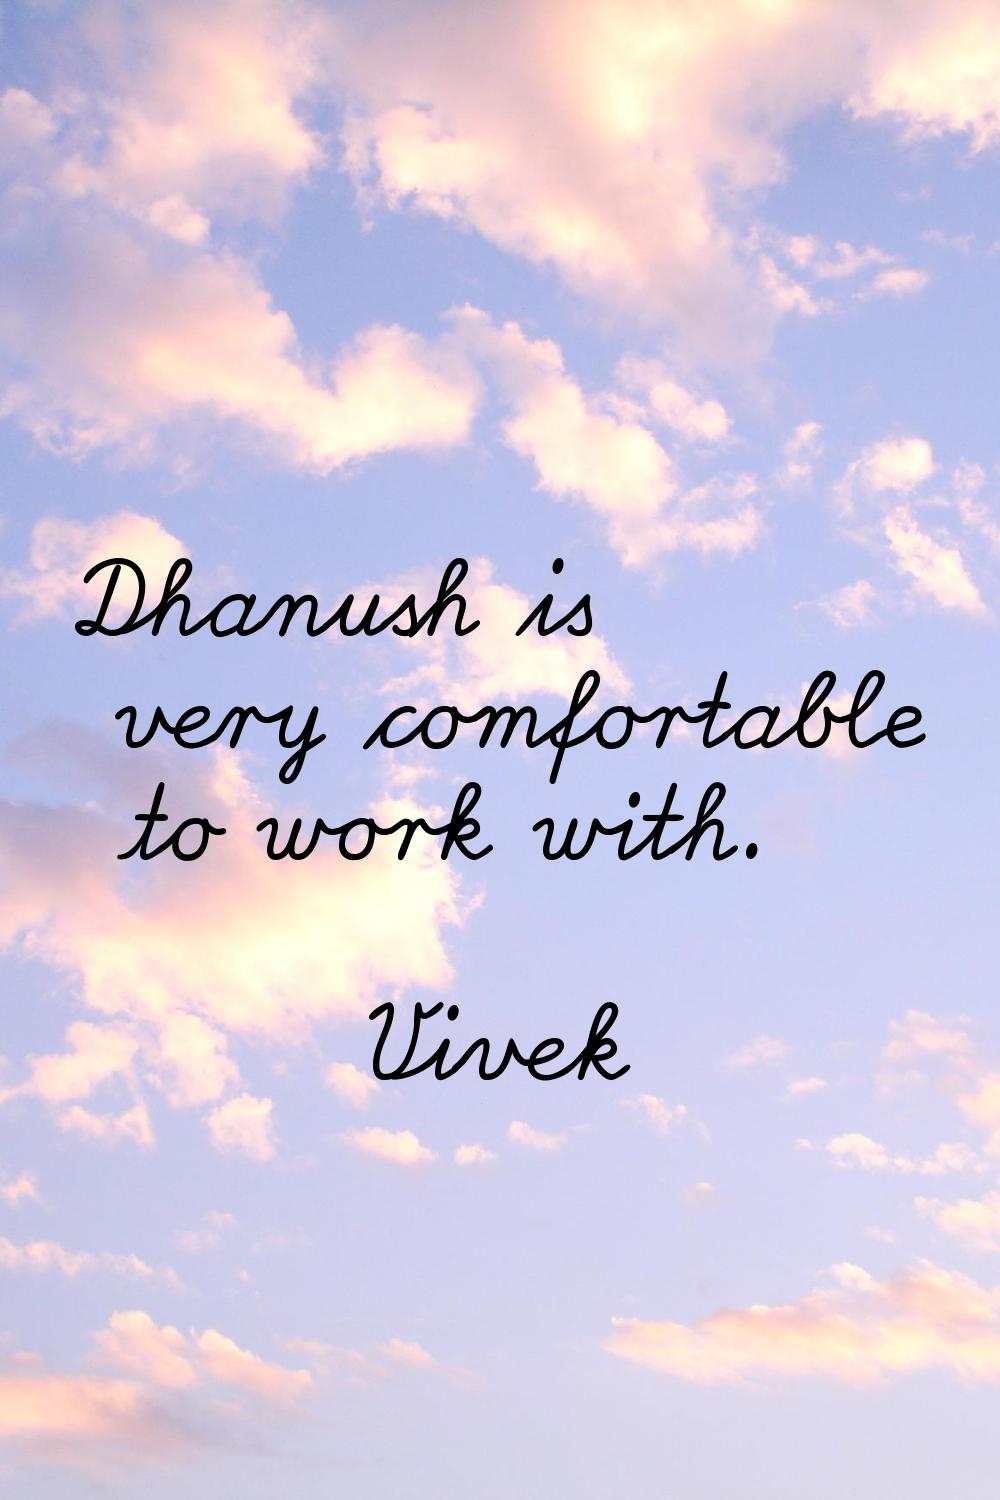 Dhanush is very comfortable to work with.